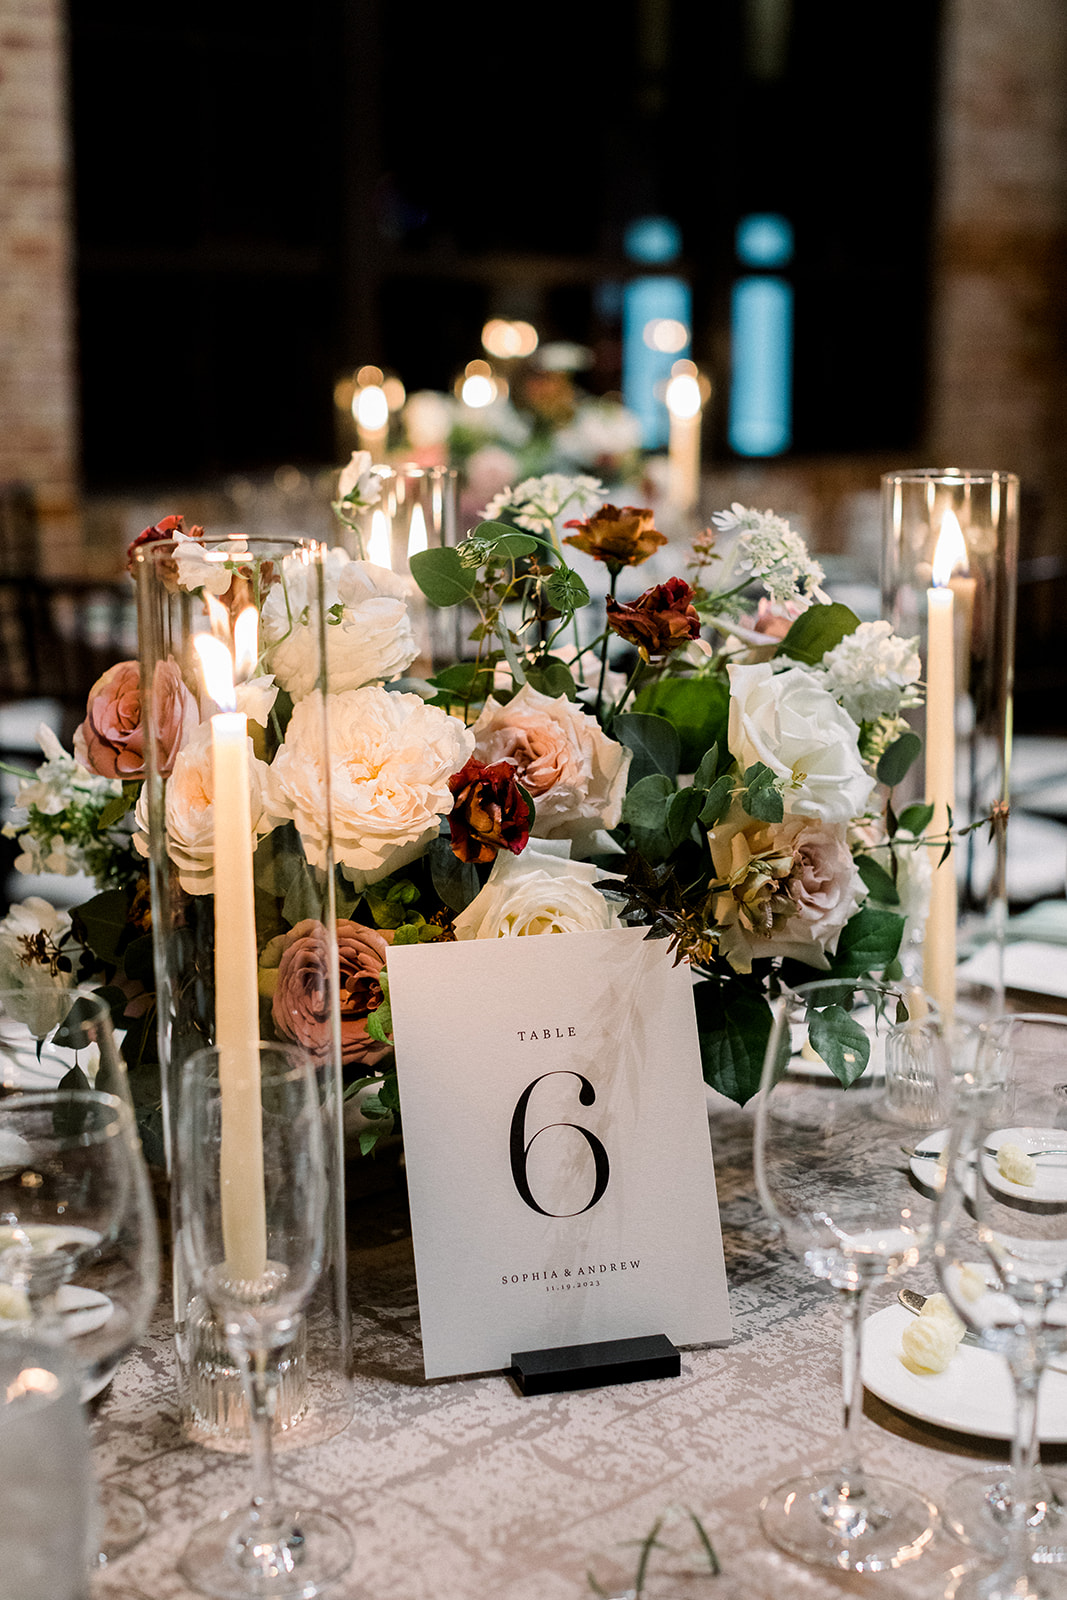 Wedding Centerpiece with table number